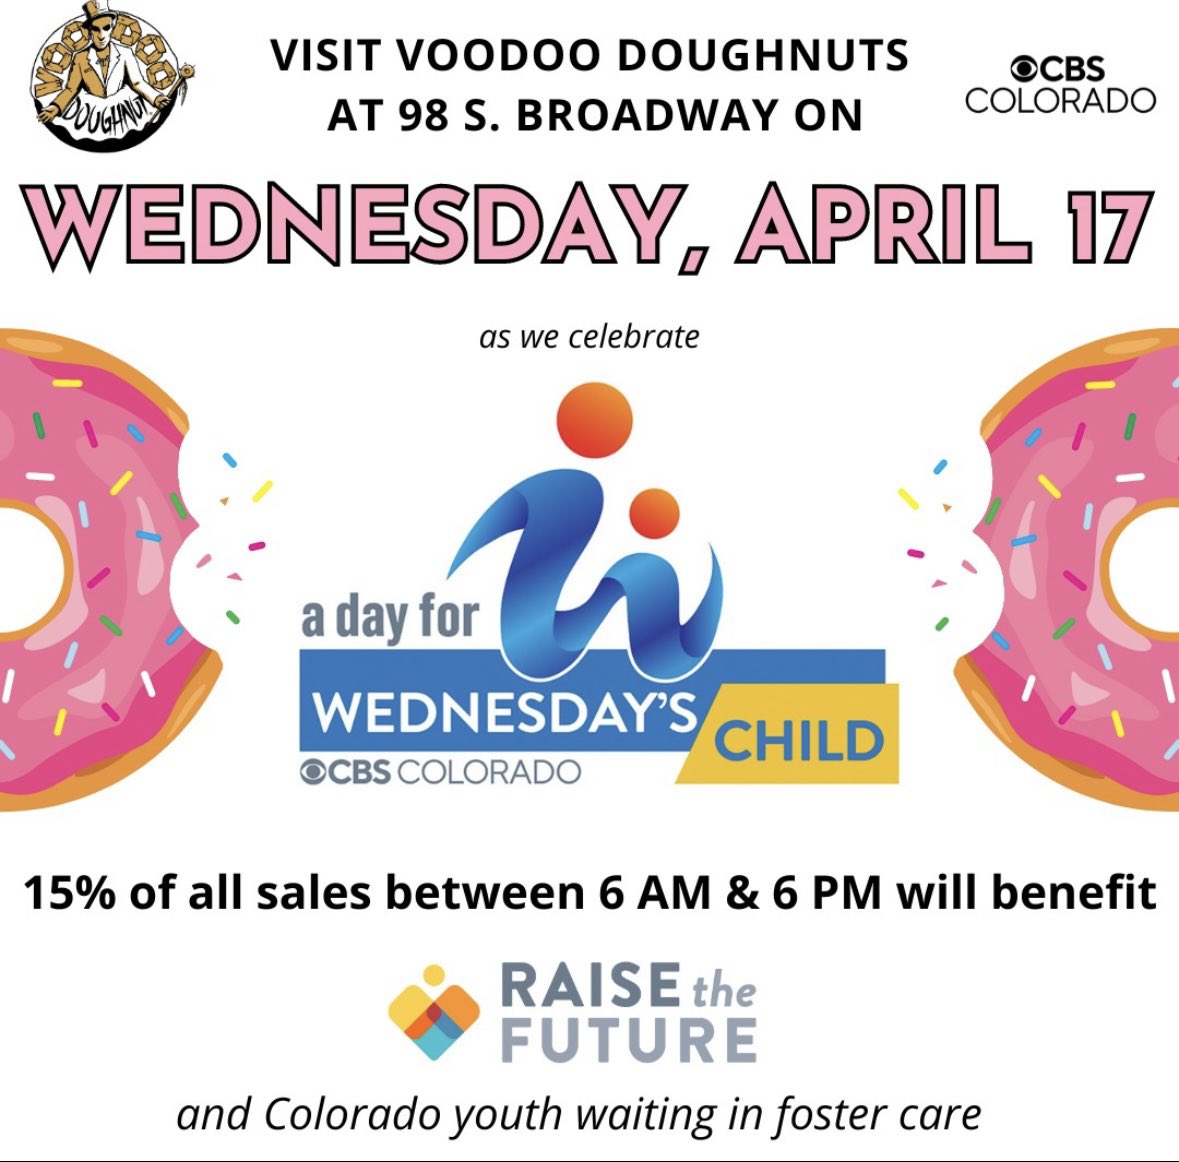 And want an easy way to support @RaiseFuture tomorrow? Eat a donut! 15% of sales at Voodoo Donut on S. Broadway will be donated!